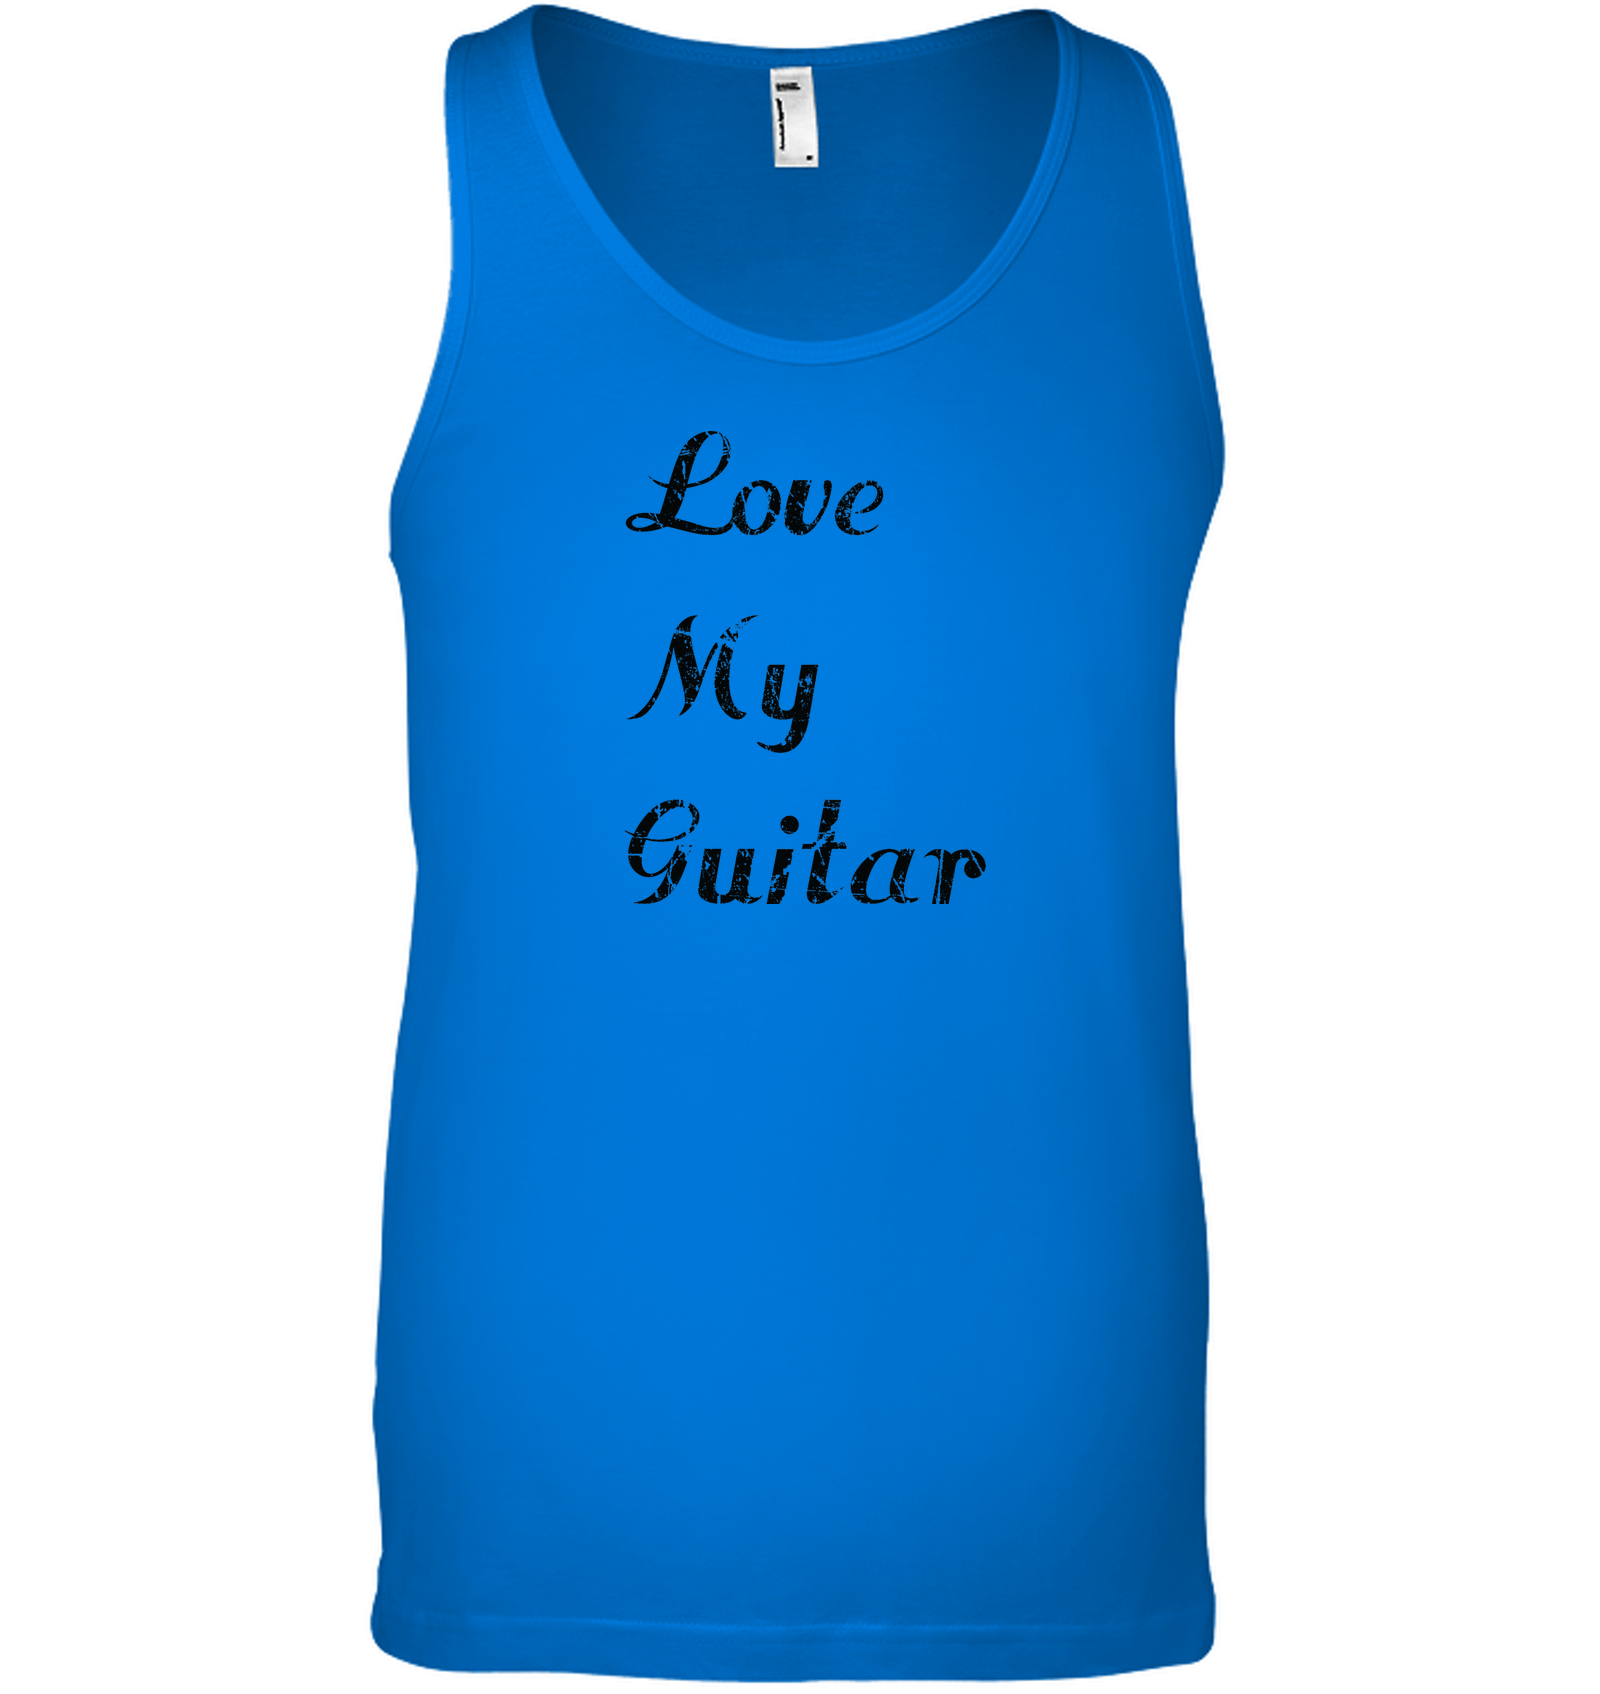 Love My Guitar simple and true - Bella + Canvas Unisex Jersey Tank